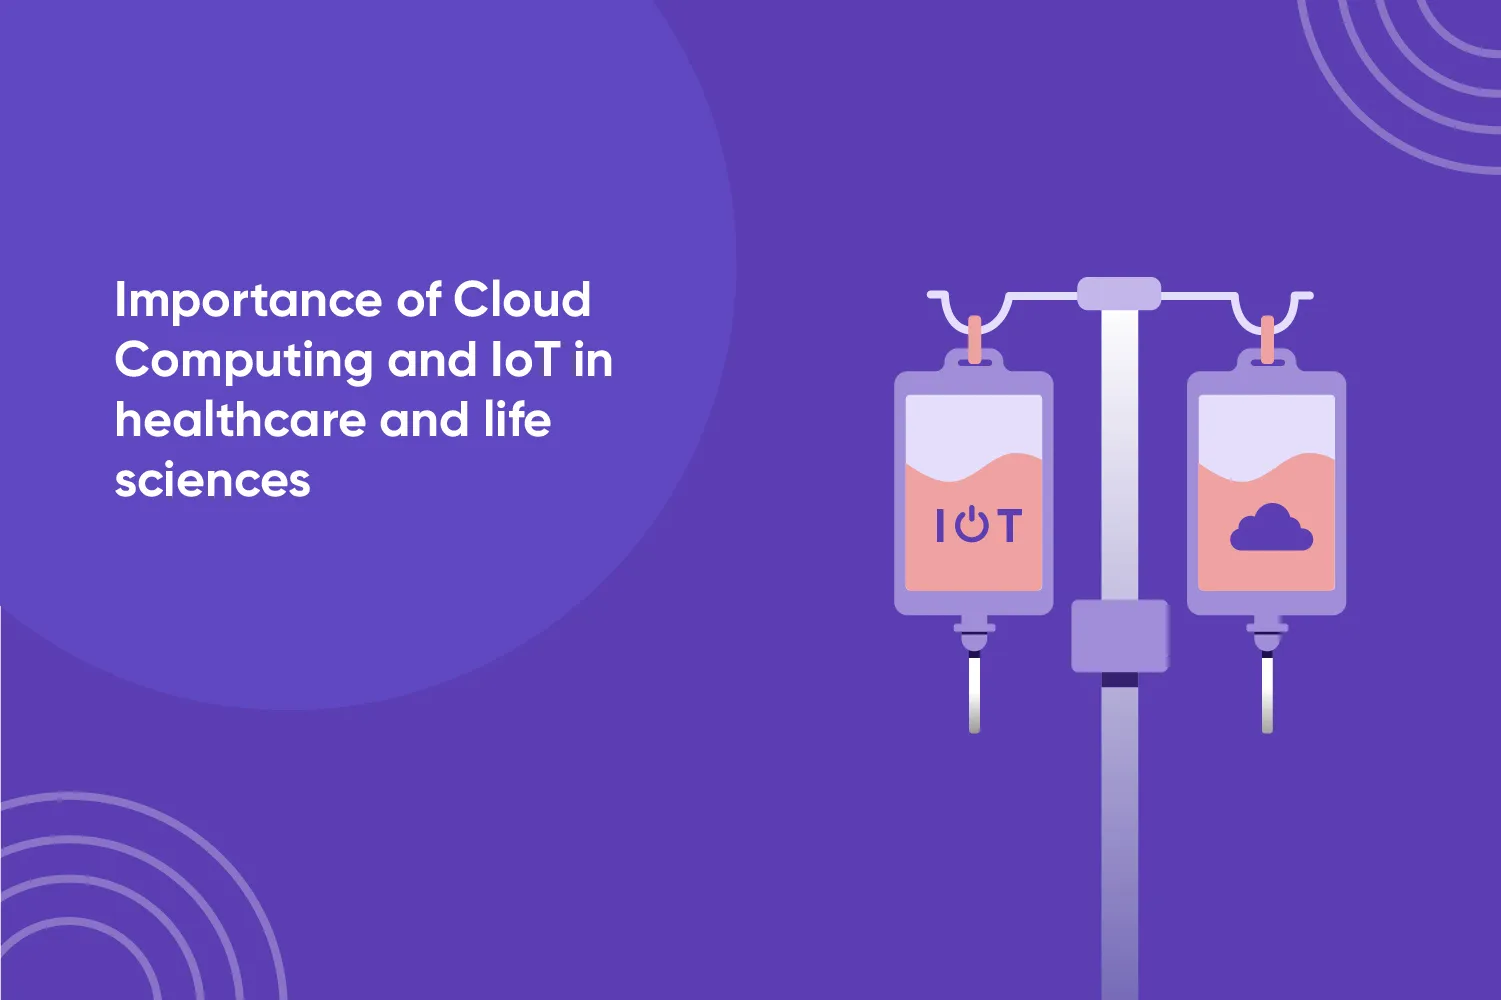 Role of Cloud computing and IoT's in Healthcare and Life Sciences